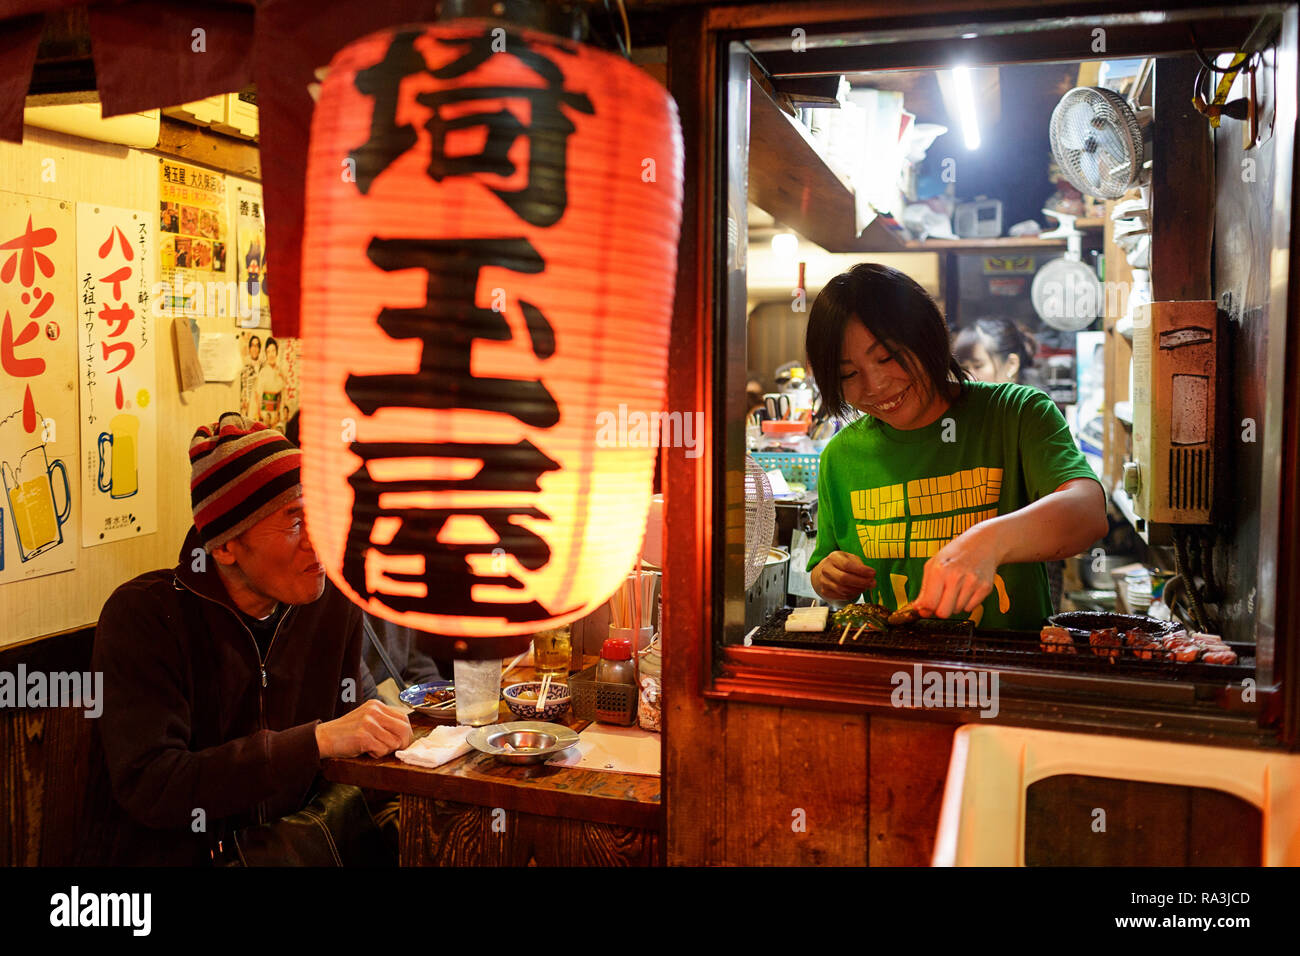 A Japanese chef cooks at Hot and smoky Tokyo street restaurant, as locals eat and drink into the night. Japan Stock Photo